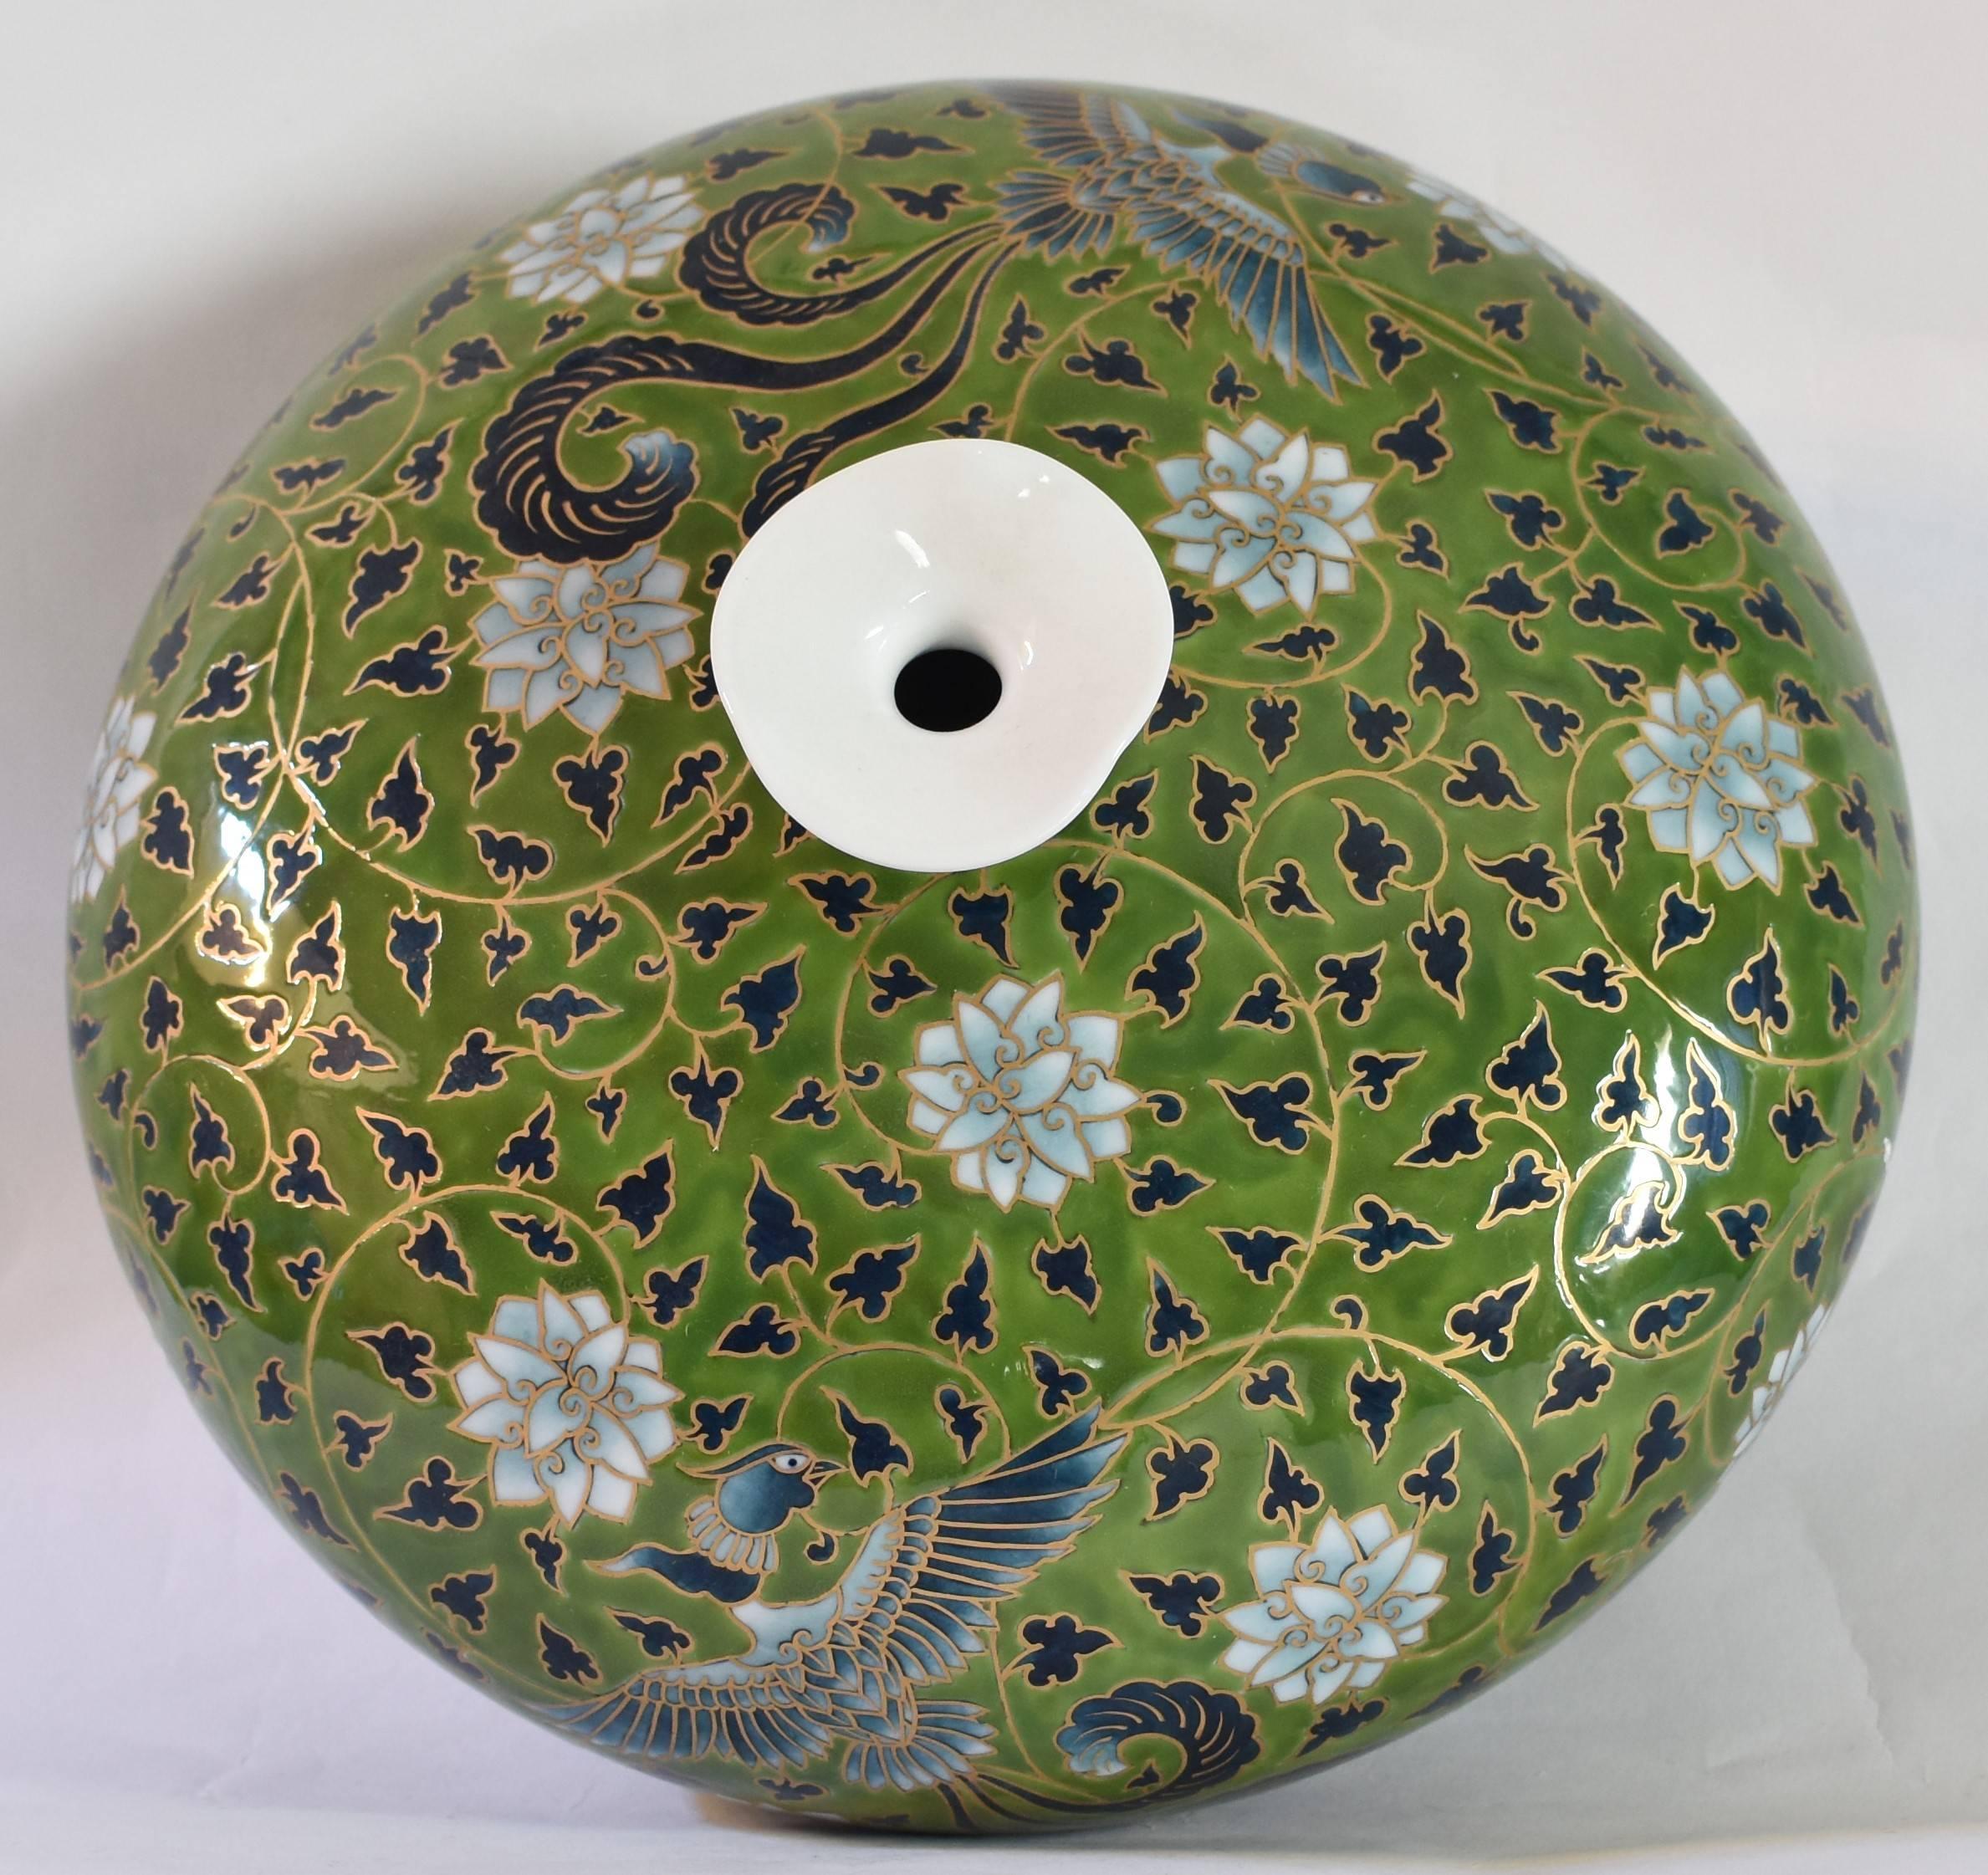 This hand-painted one-of-a-kind contemporary Japanese porcelain vase is presented in an auspicious rotund form and combines an arabesque motif with birds and flowers set against a soothing moss green background. The work is signed by Fujii Katsuma,